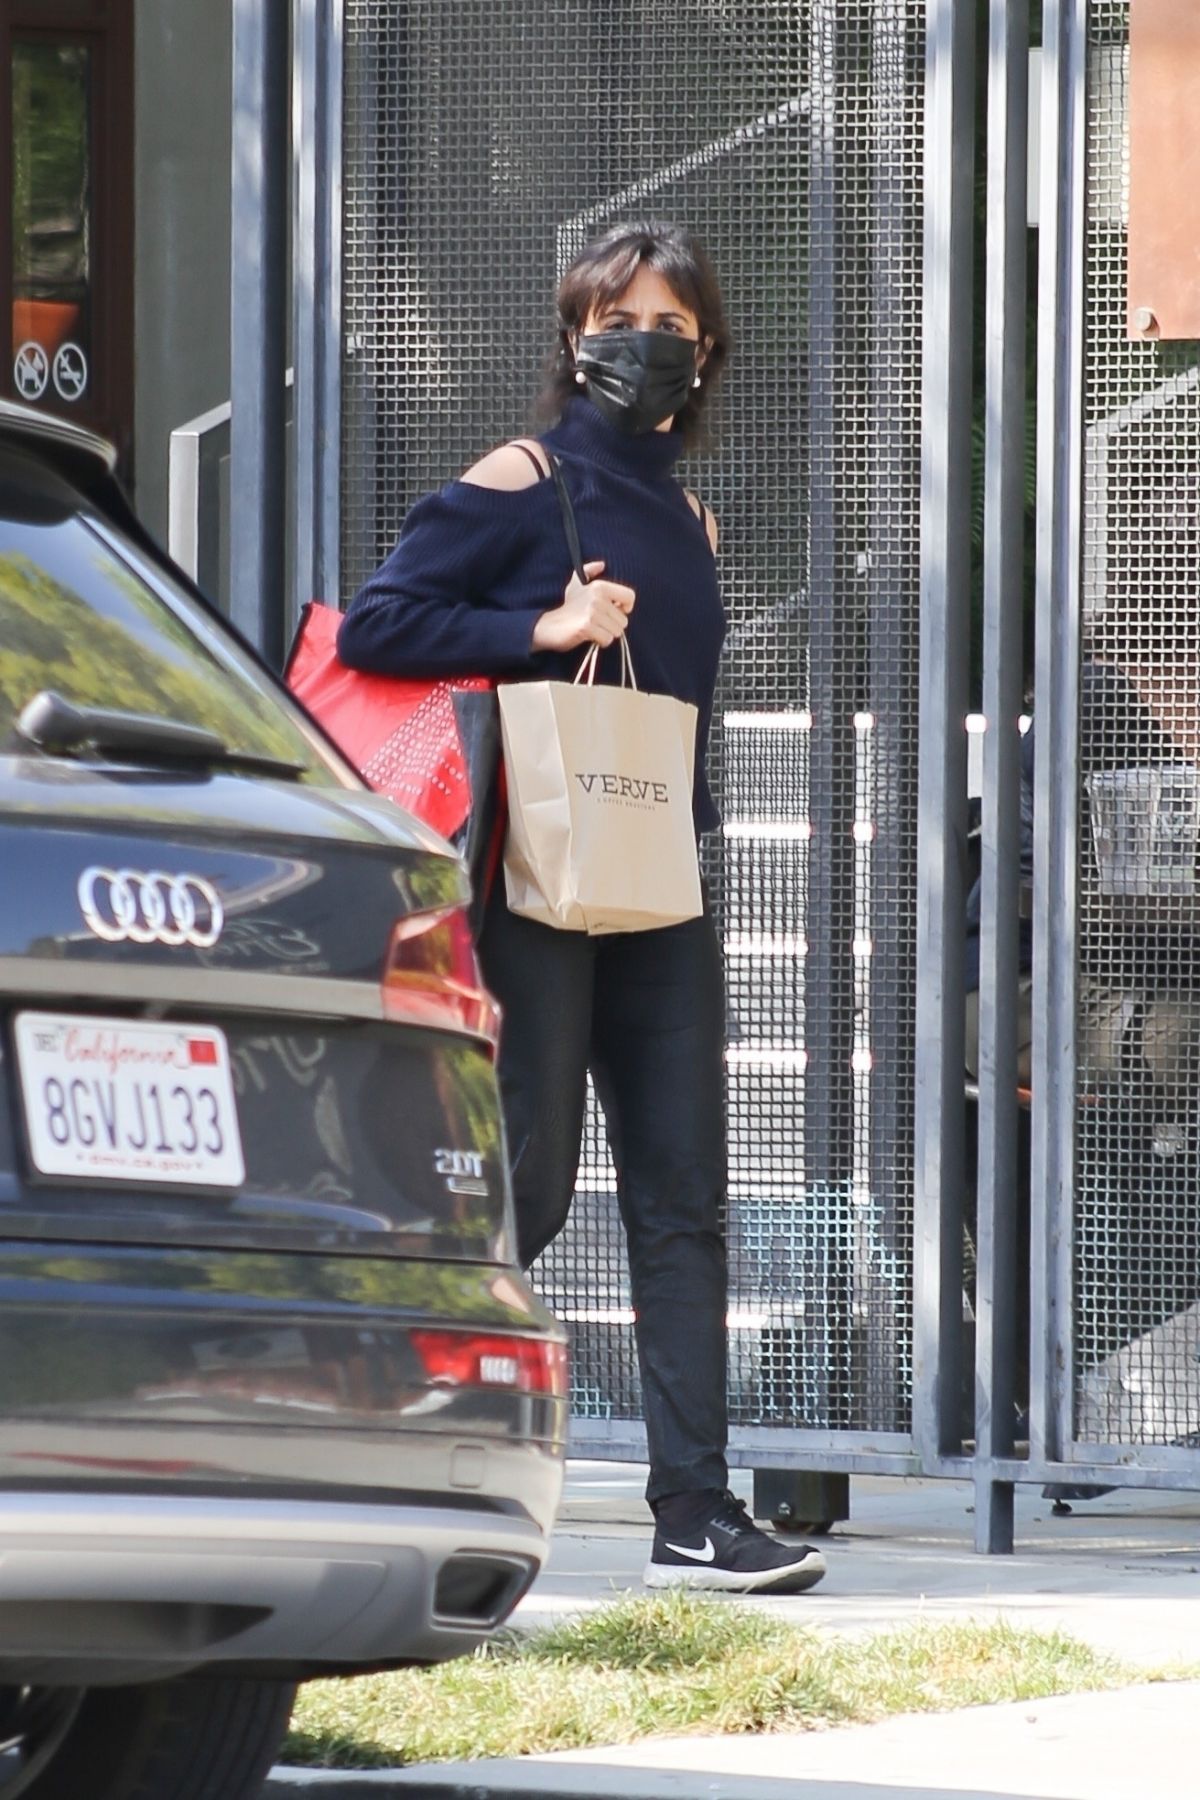 camila-cabello-leaves-verve-cafe-in-west-hollywood-03-20-2021-2.jpg